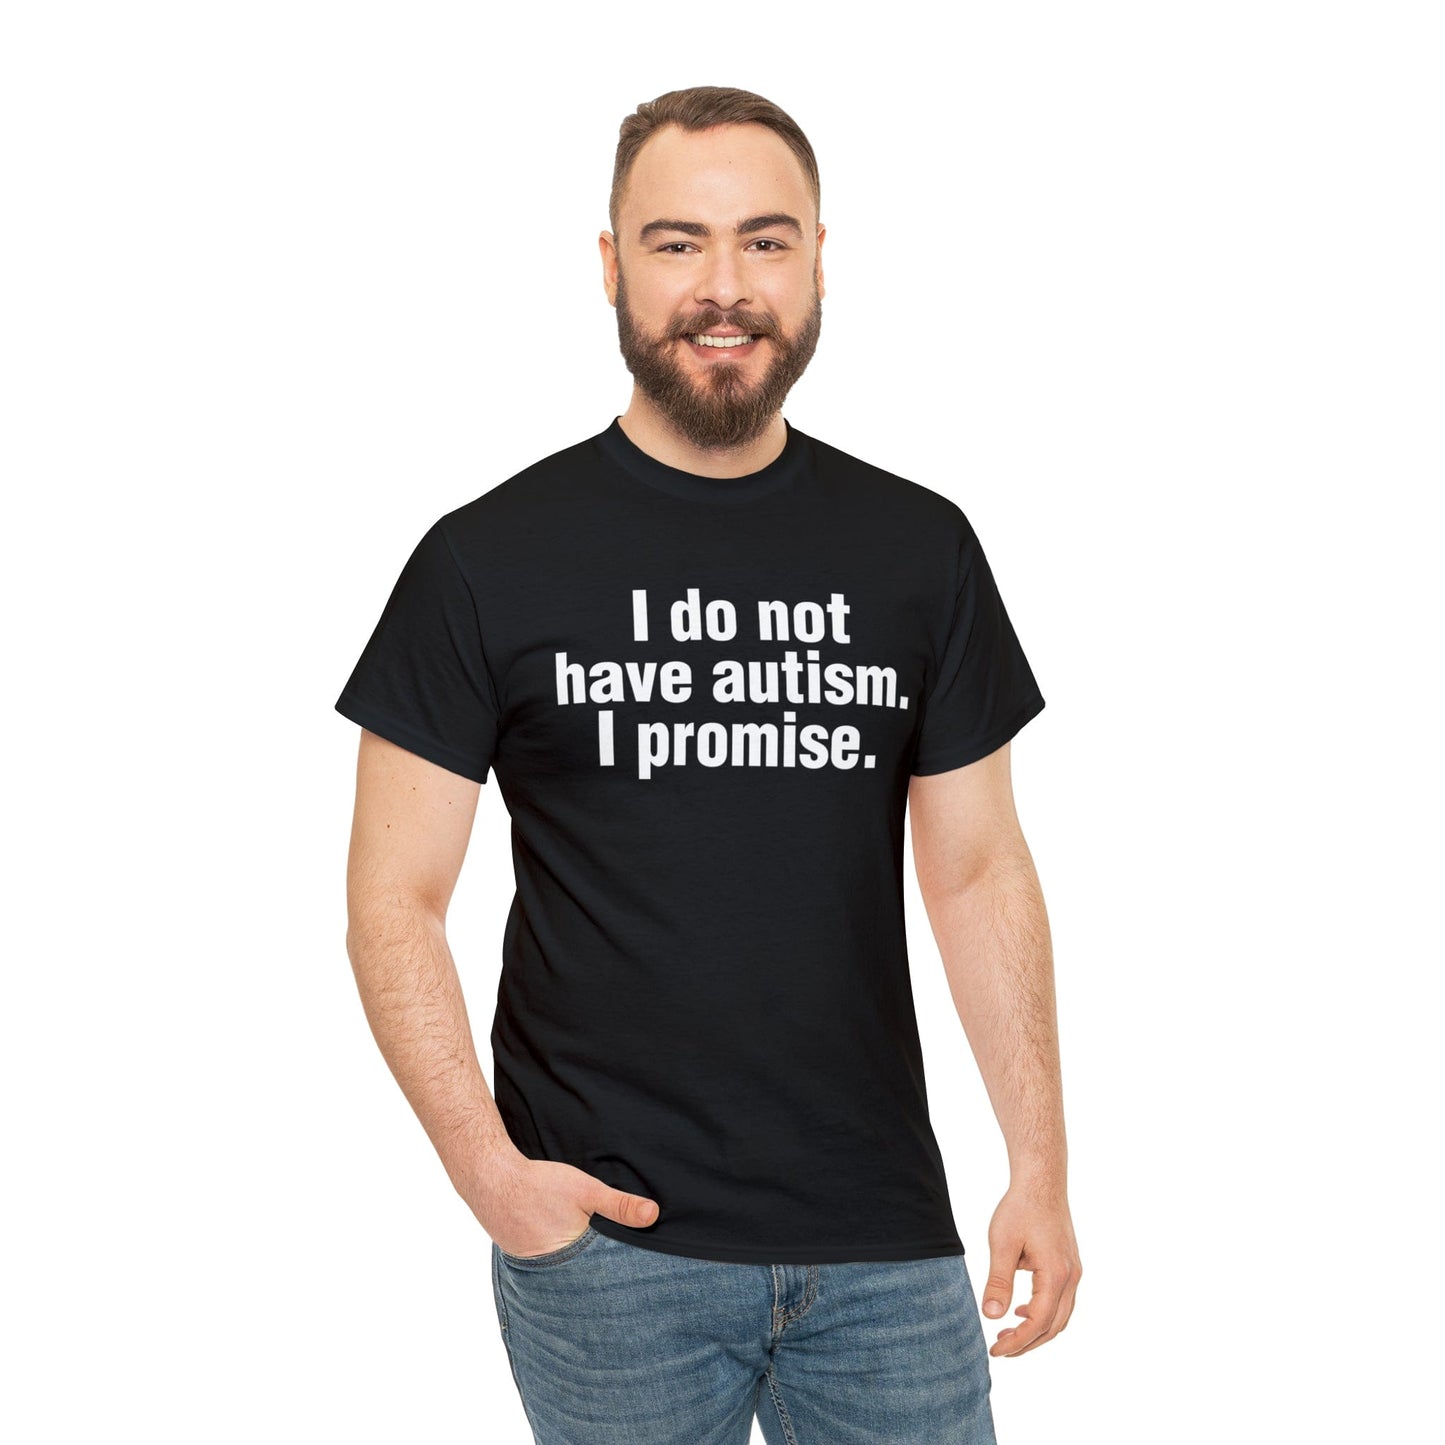 I do not have autism. I promise.